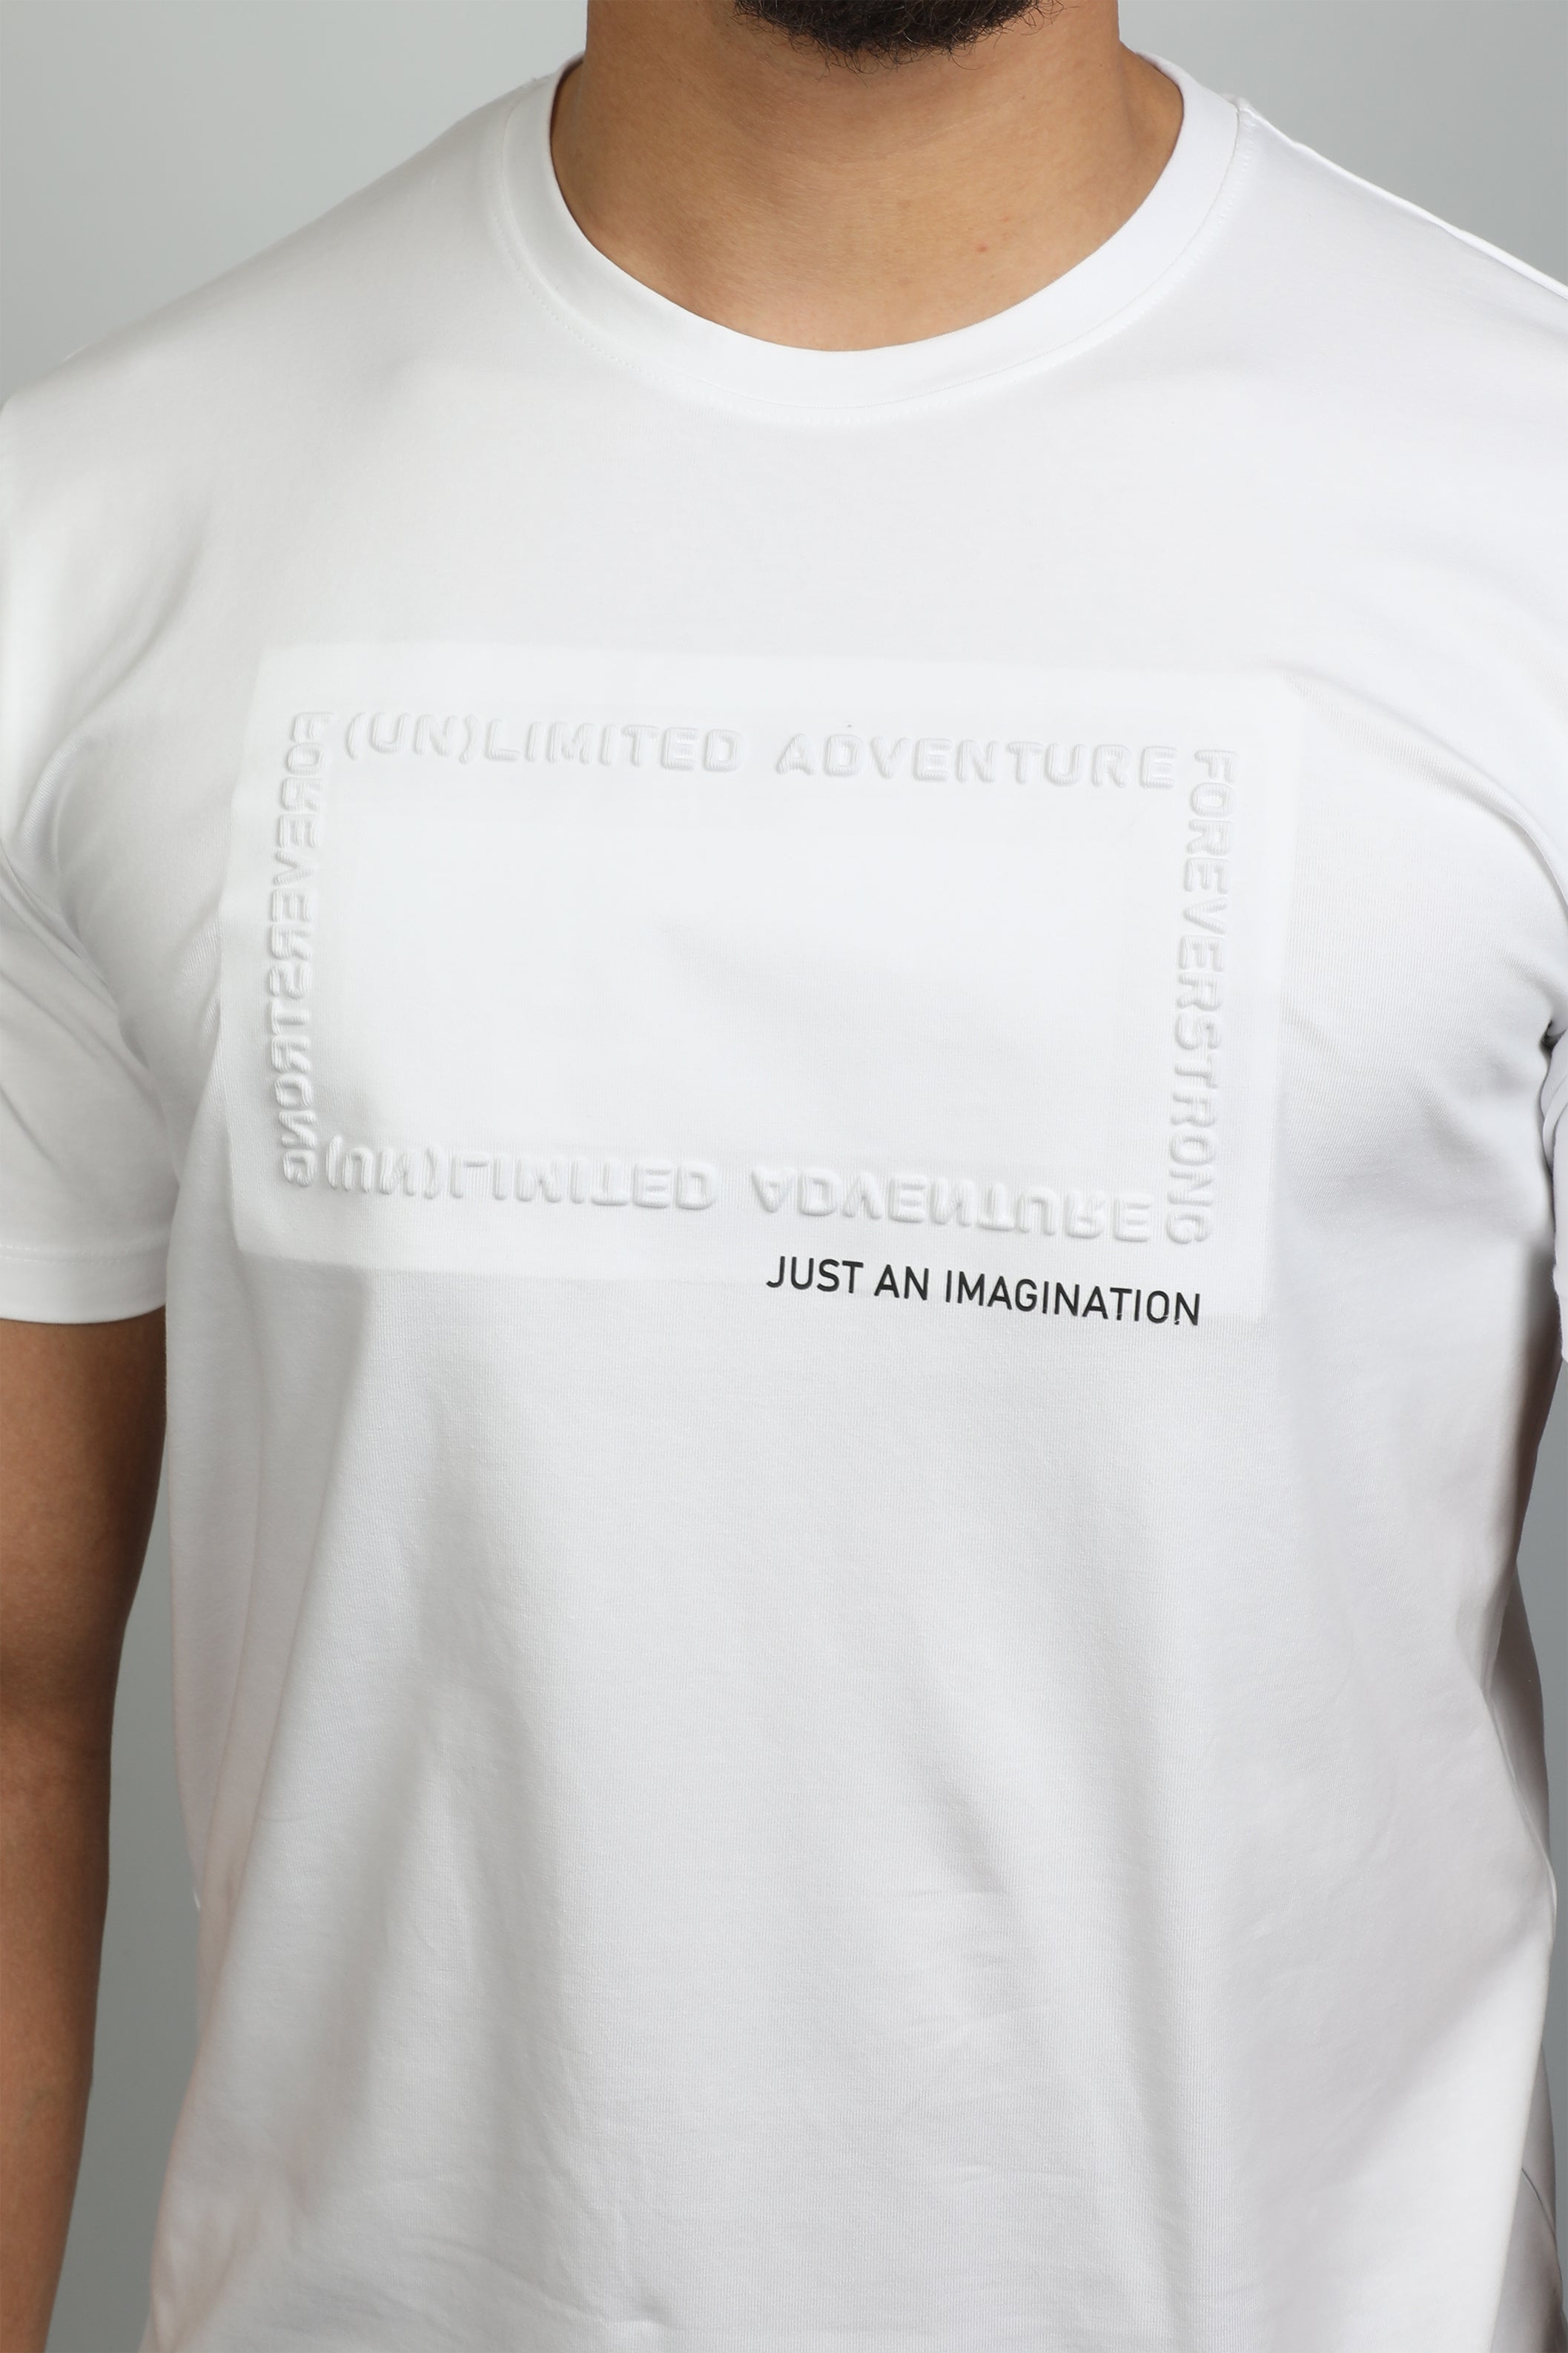 "Just An Imagination" Front Designed White T-shirt